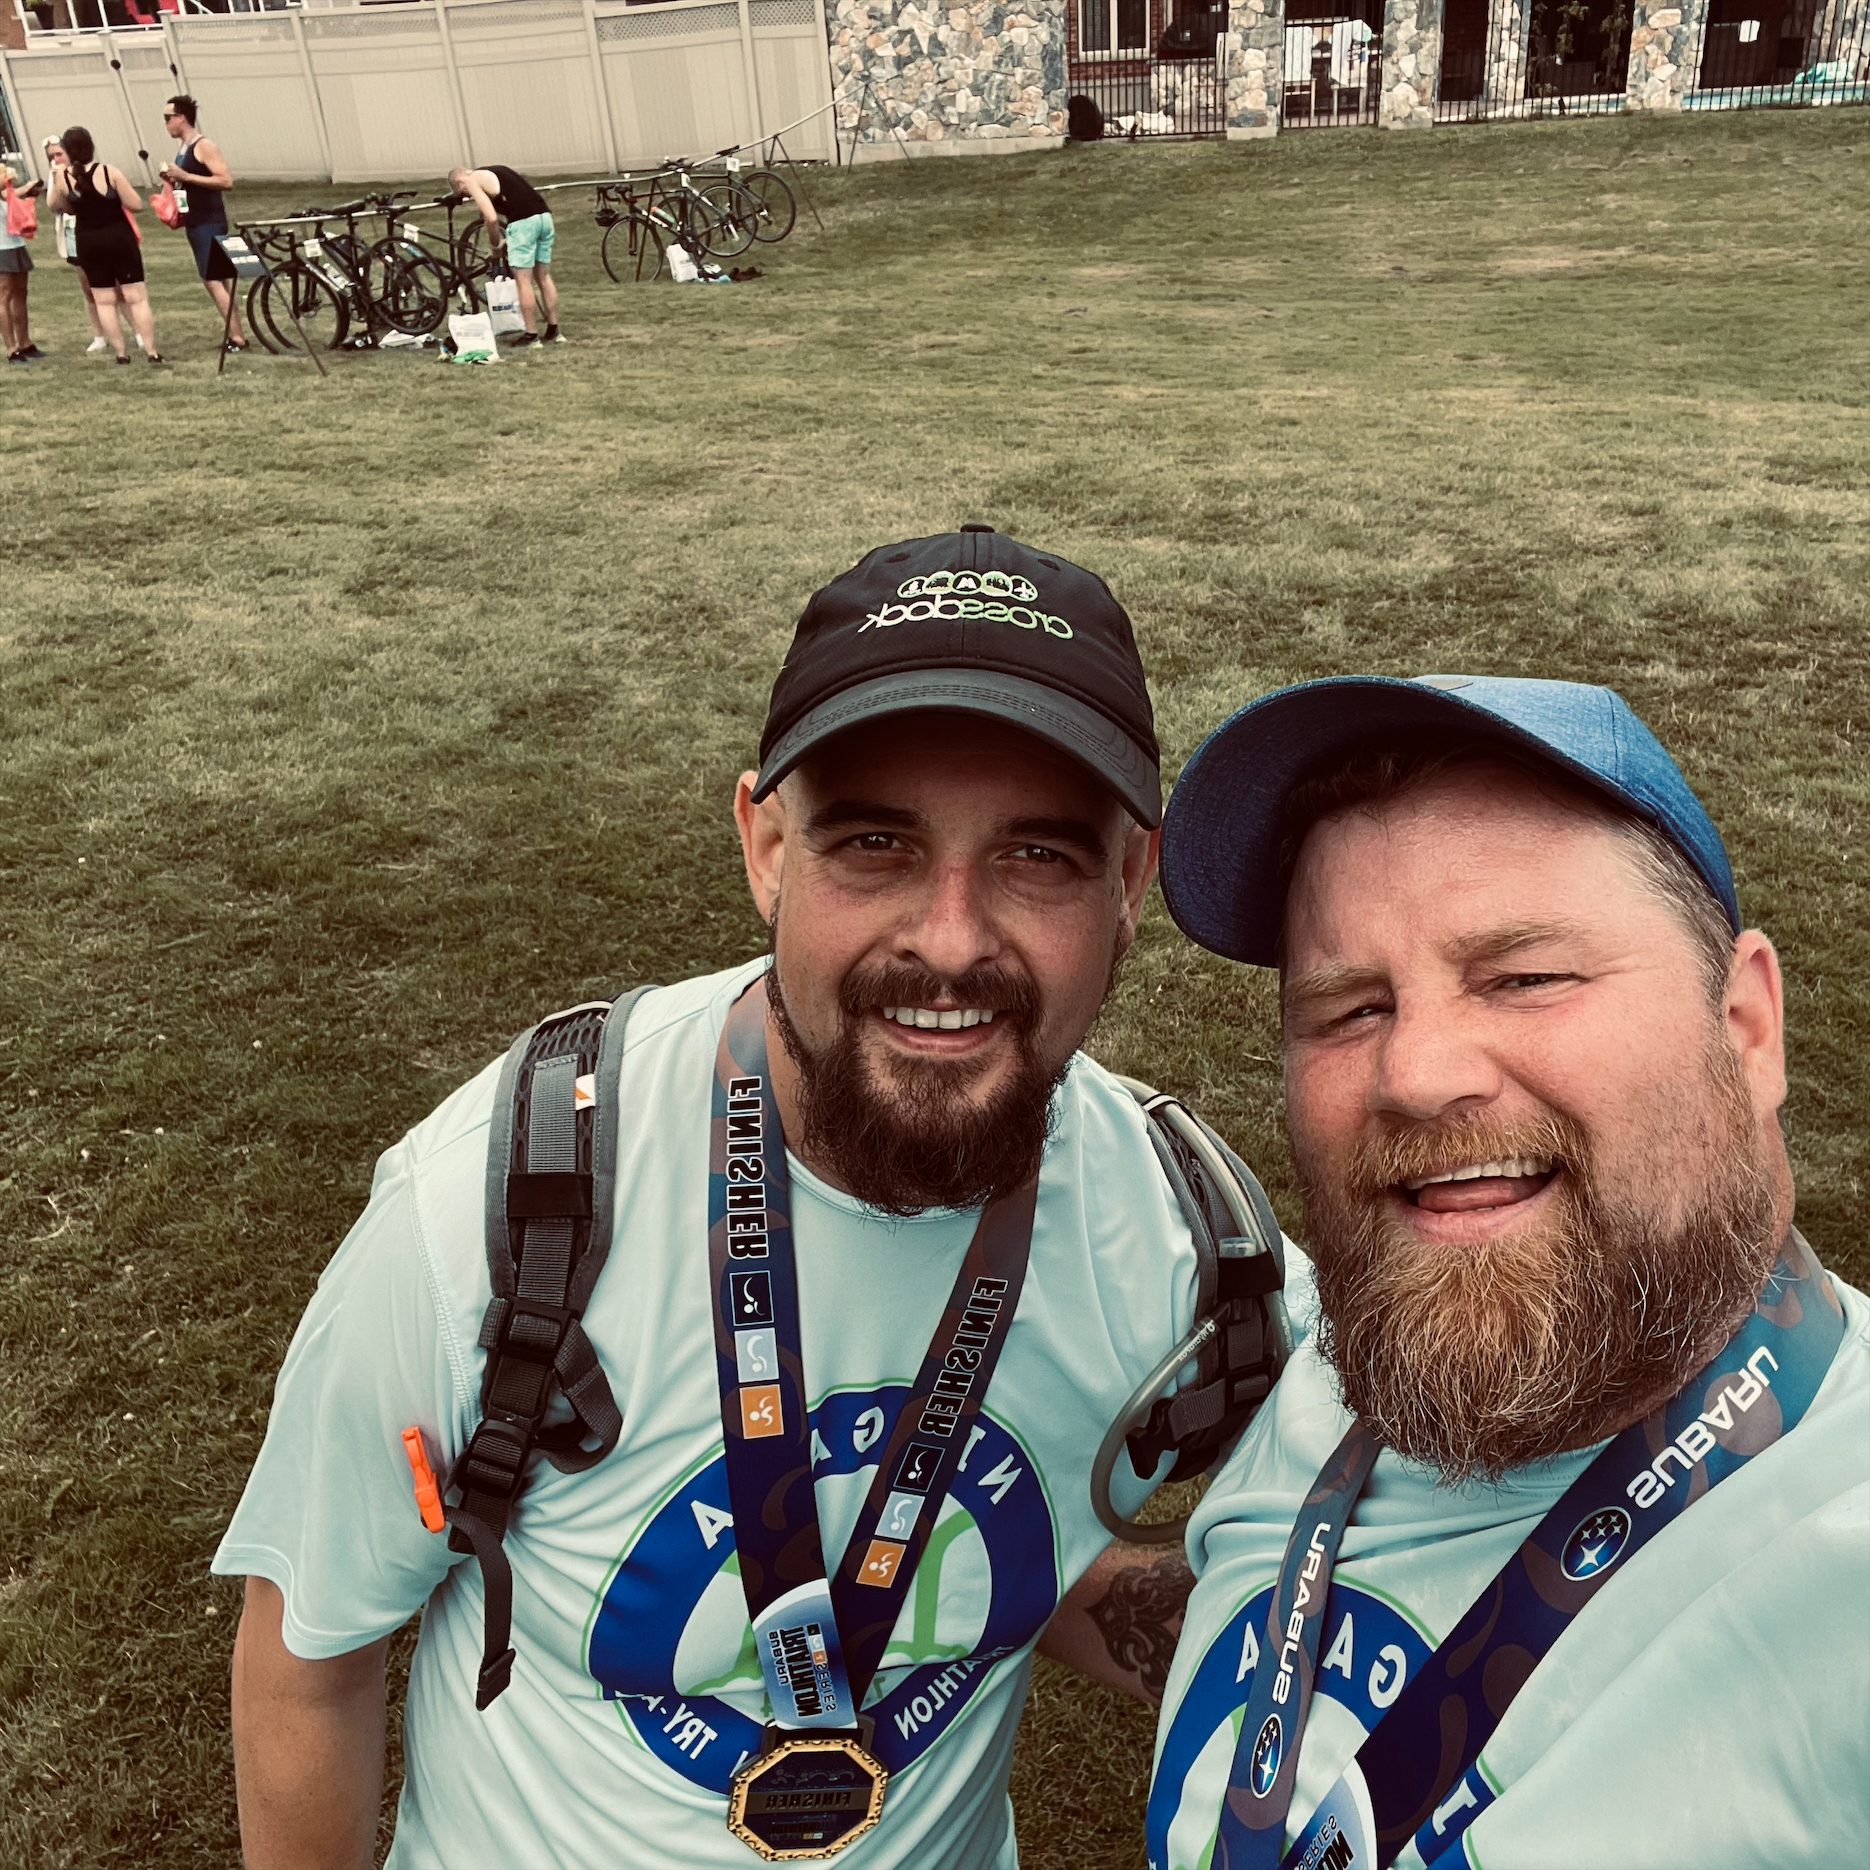 We are thrilled to celebrate the incredible achievement of our Crossdock team members, Drew and Richard, who recently took on and completed the rookie triathlon series hosted by Subaru Canada! 

This accomplishment mirrors the commitment we have at Crossdock. Just as Rich and Drew supported each other through the triathlon, we strive to provide unwavering support and dedication to our clients.

#CrossdockStrong #WorkCulture #TriathlonHeroes #Teamwork #SubaruCanada #RookieTriathlon #Inspiration #FitnessJourney #Logistics #3PL #Mississauga #crossdocksystems #canadianlogistics